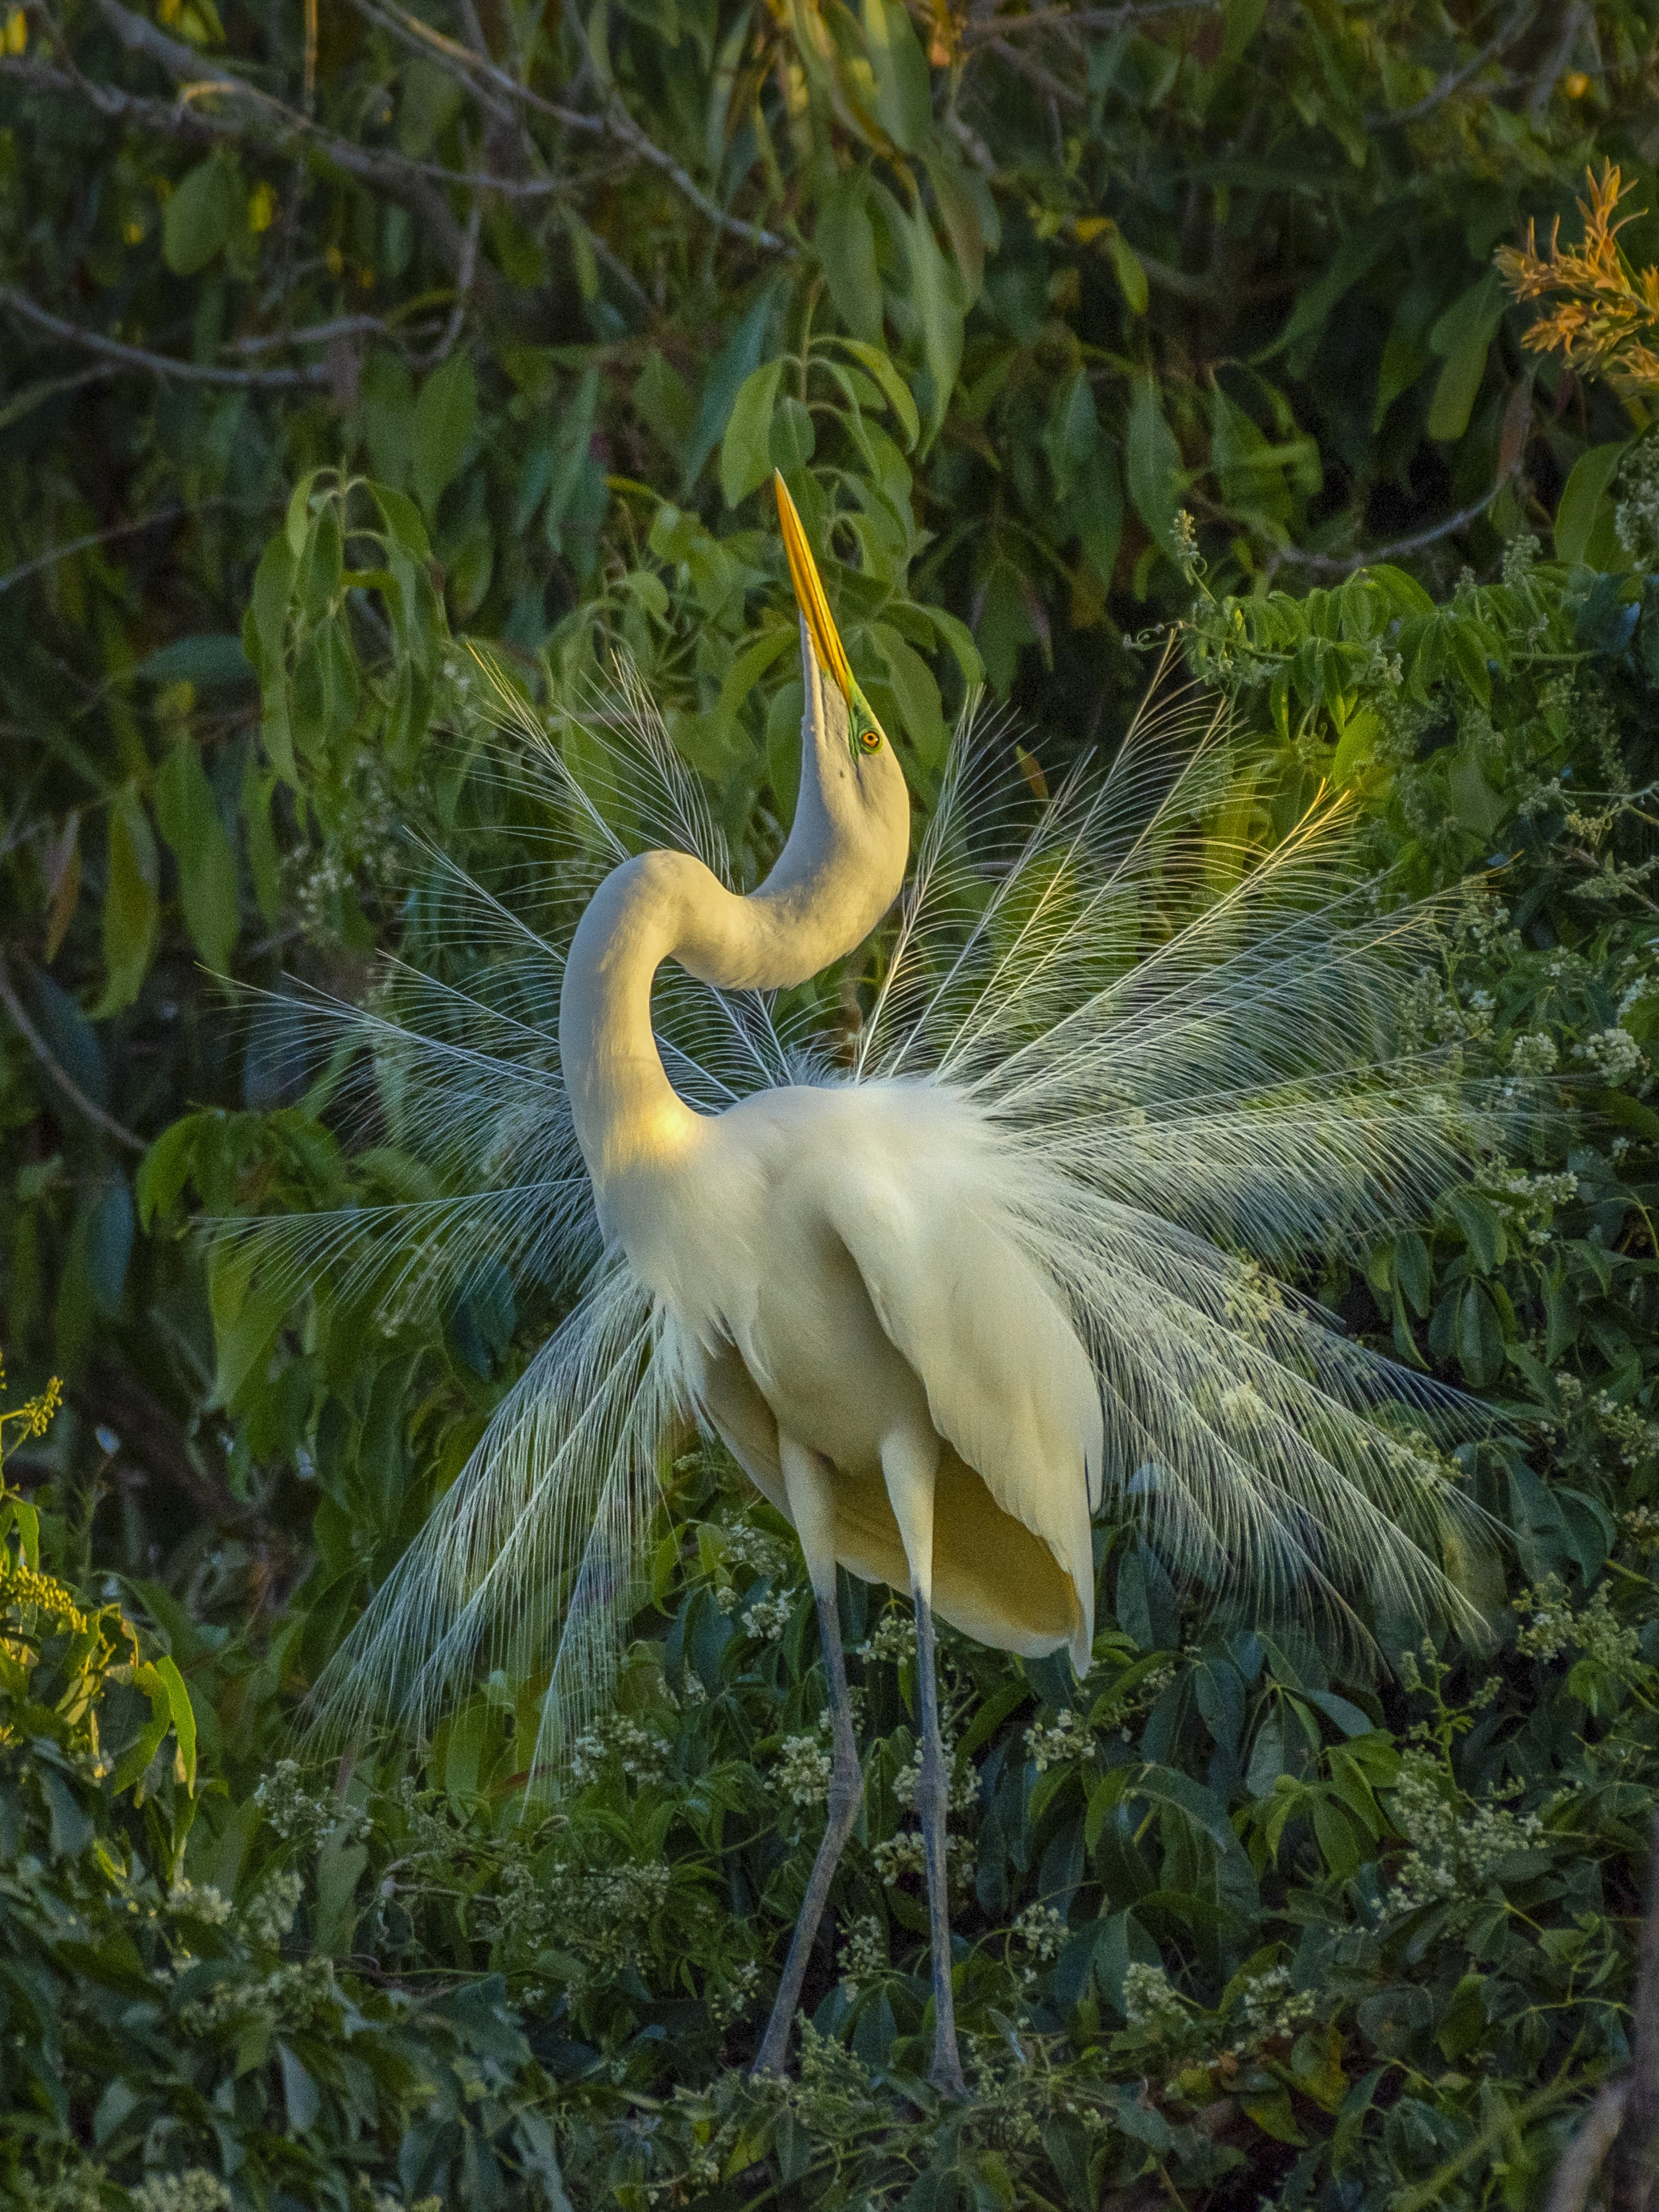 A Great Egret splaying its feathers.